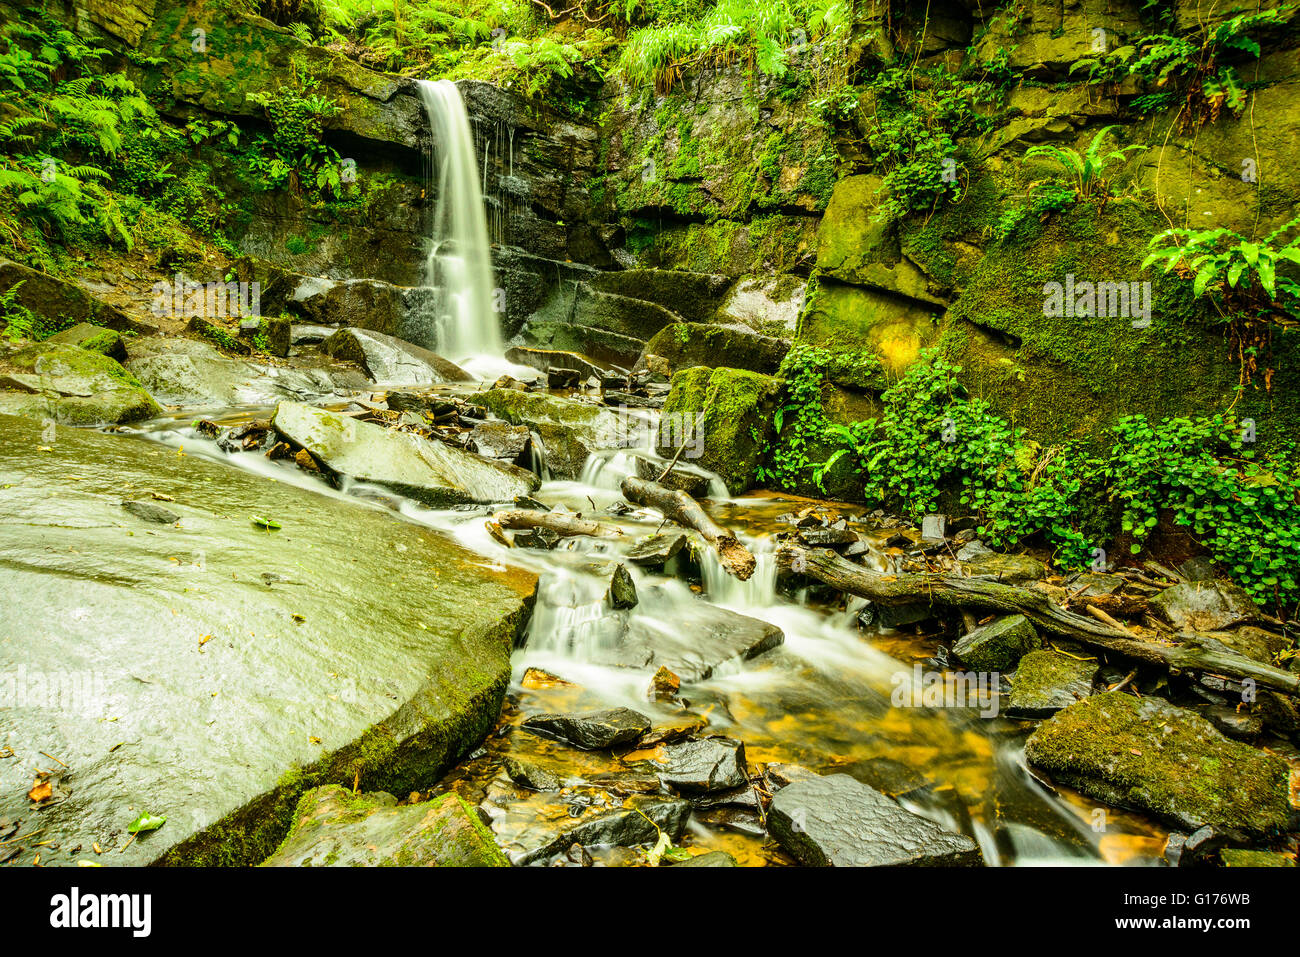 Waterfall in Fairy Glen on Sprodley Brook between Parbold and Appley Bridge Lancashire England Stock Photo